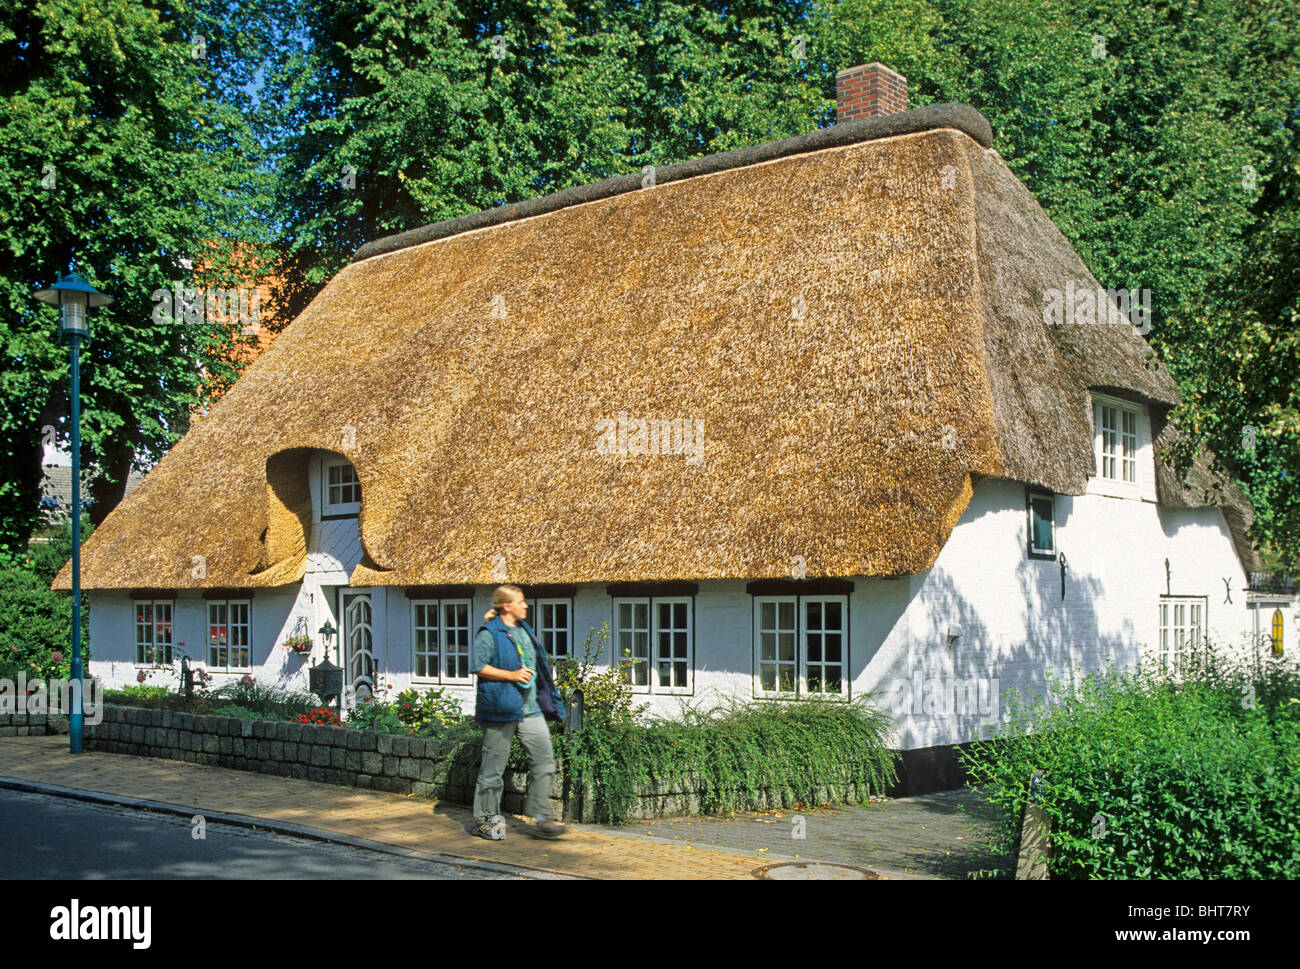 thatched house in Bredstedt, North Sea Coast, Schleswig-Holstein, Germany Stock Photo